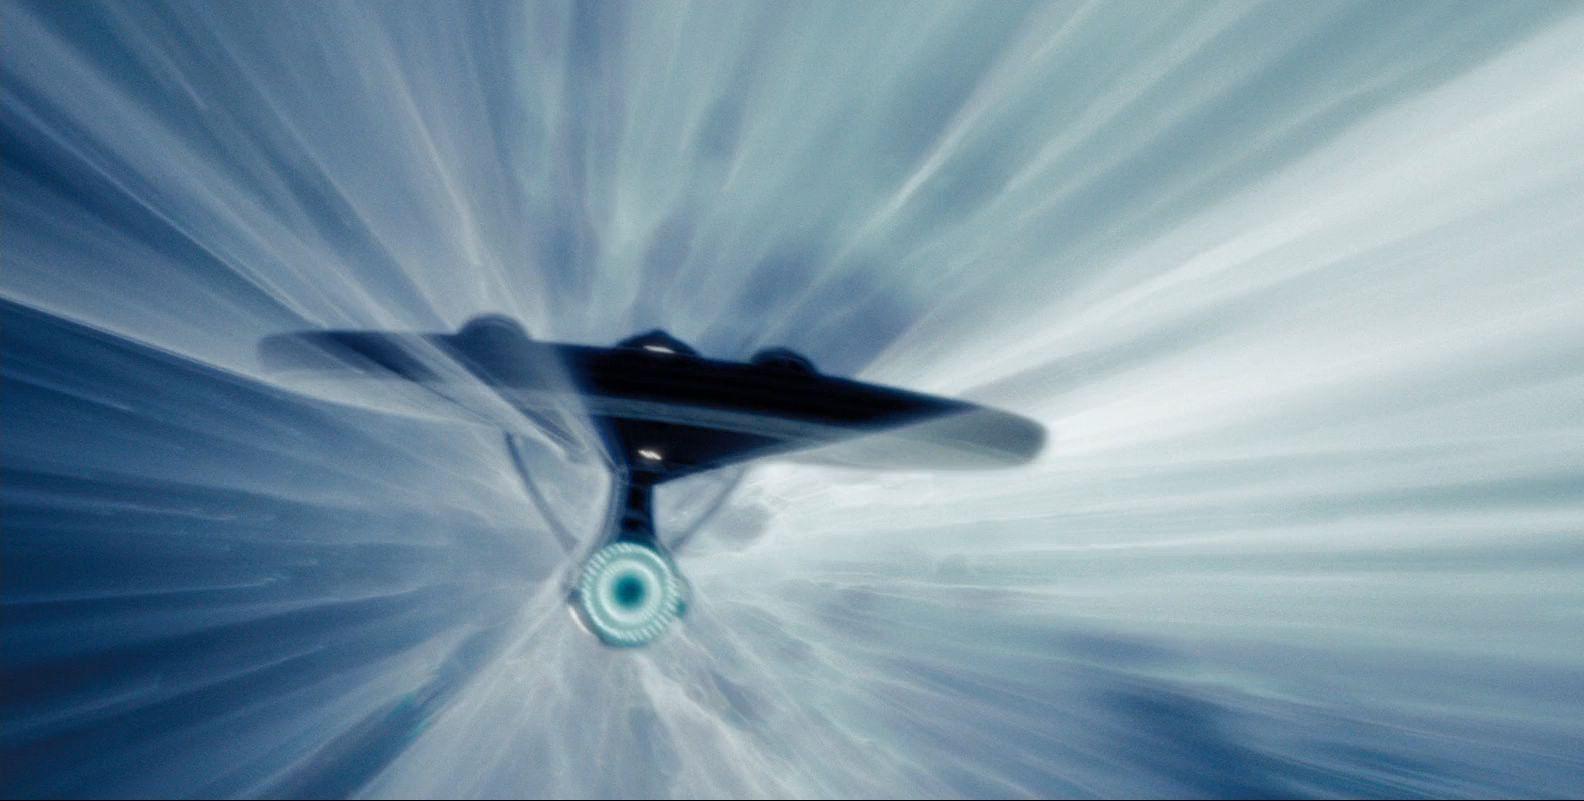 First Image From 'Star Trek Beyond' Give us our First Look at New